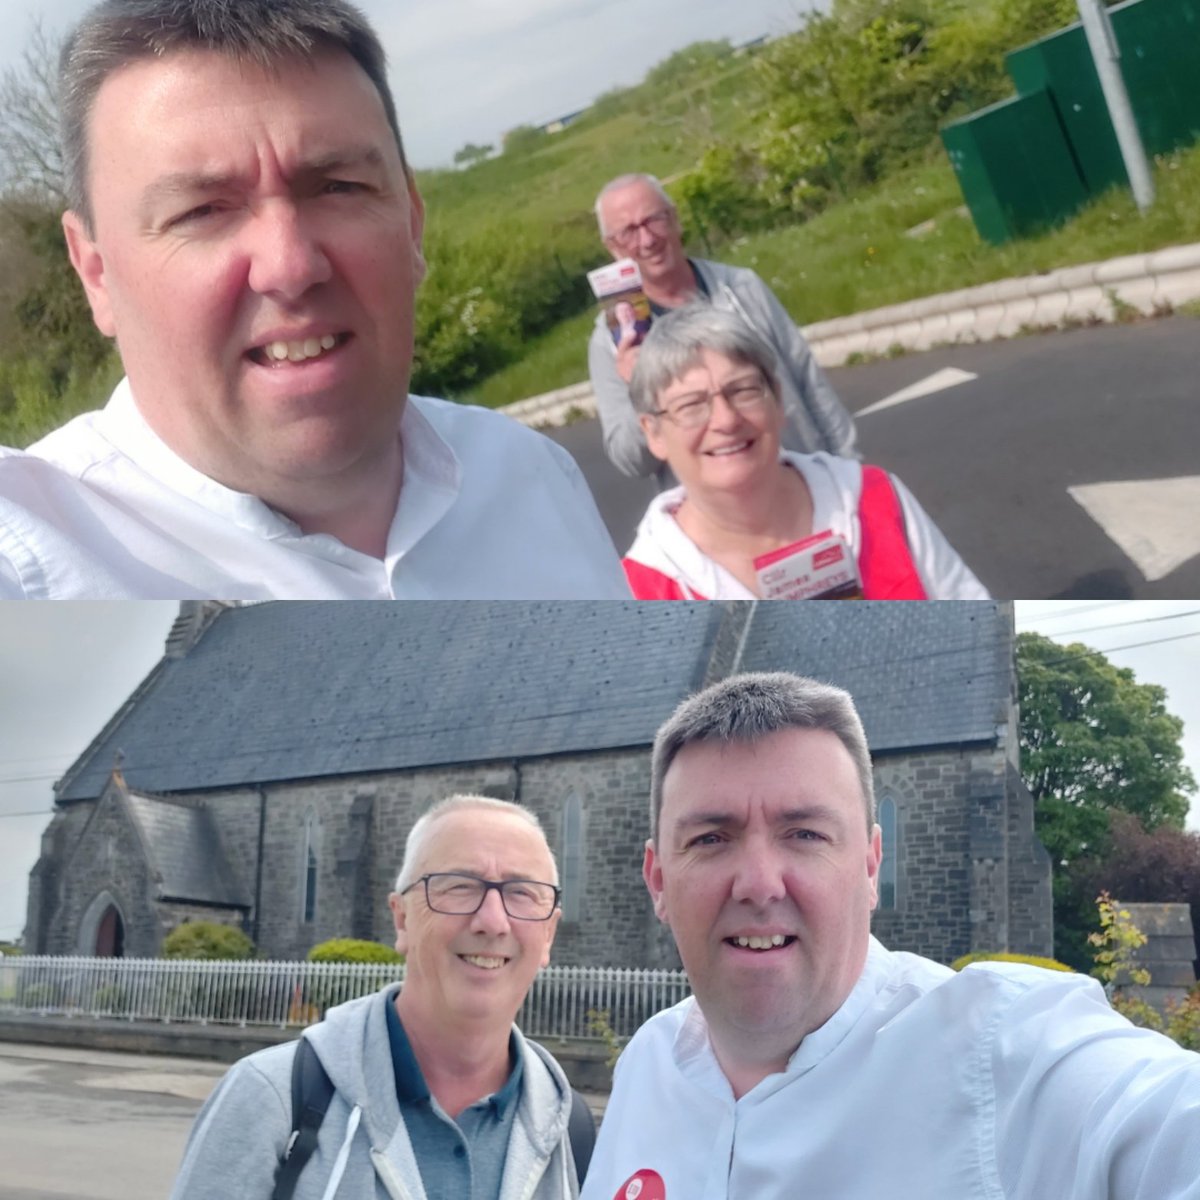 Encouraging @Labour canvass in Rolestown and Swords this afternoon. The penultimate canvass before the #LE24 posters go up. Great response and chats while out and about.